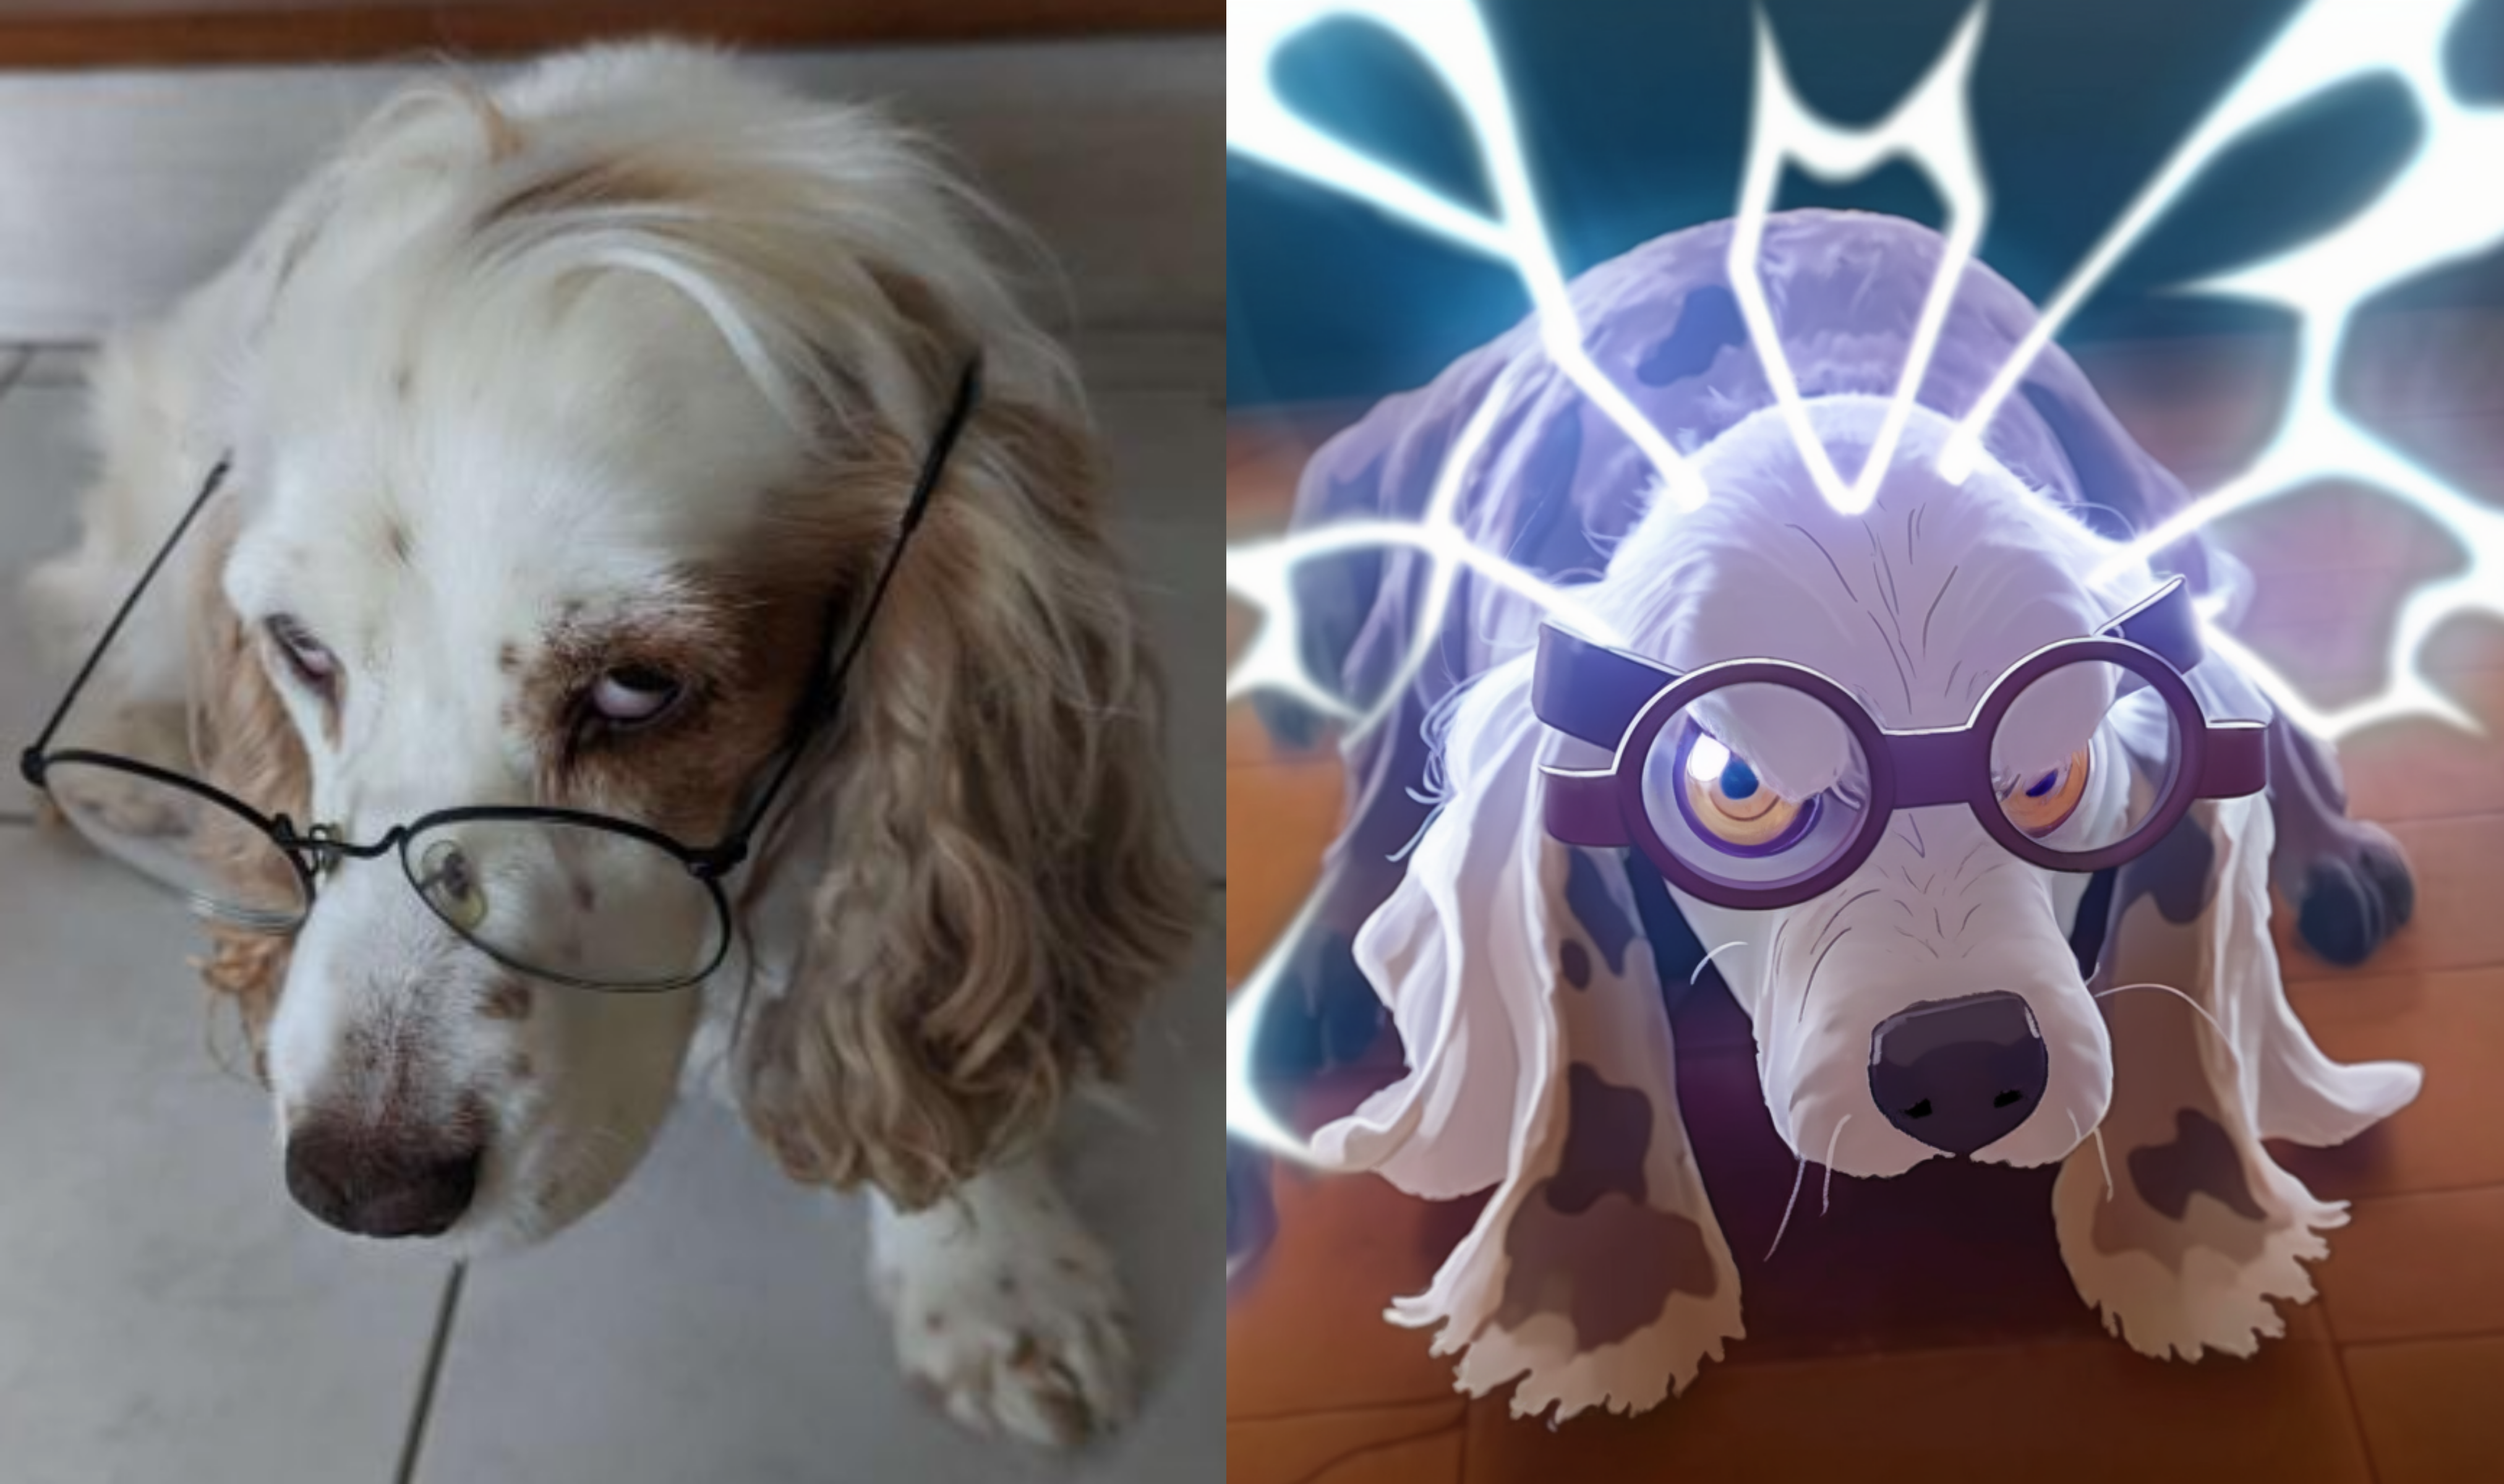 Can you wager what variety of Pokémon this dog develop into?